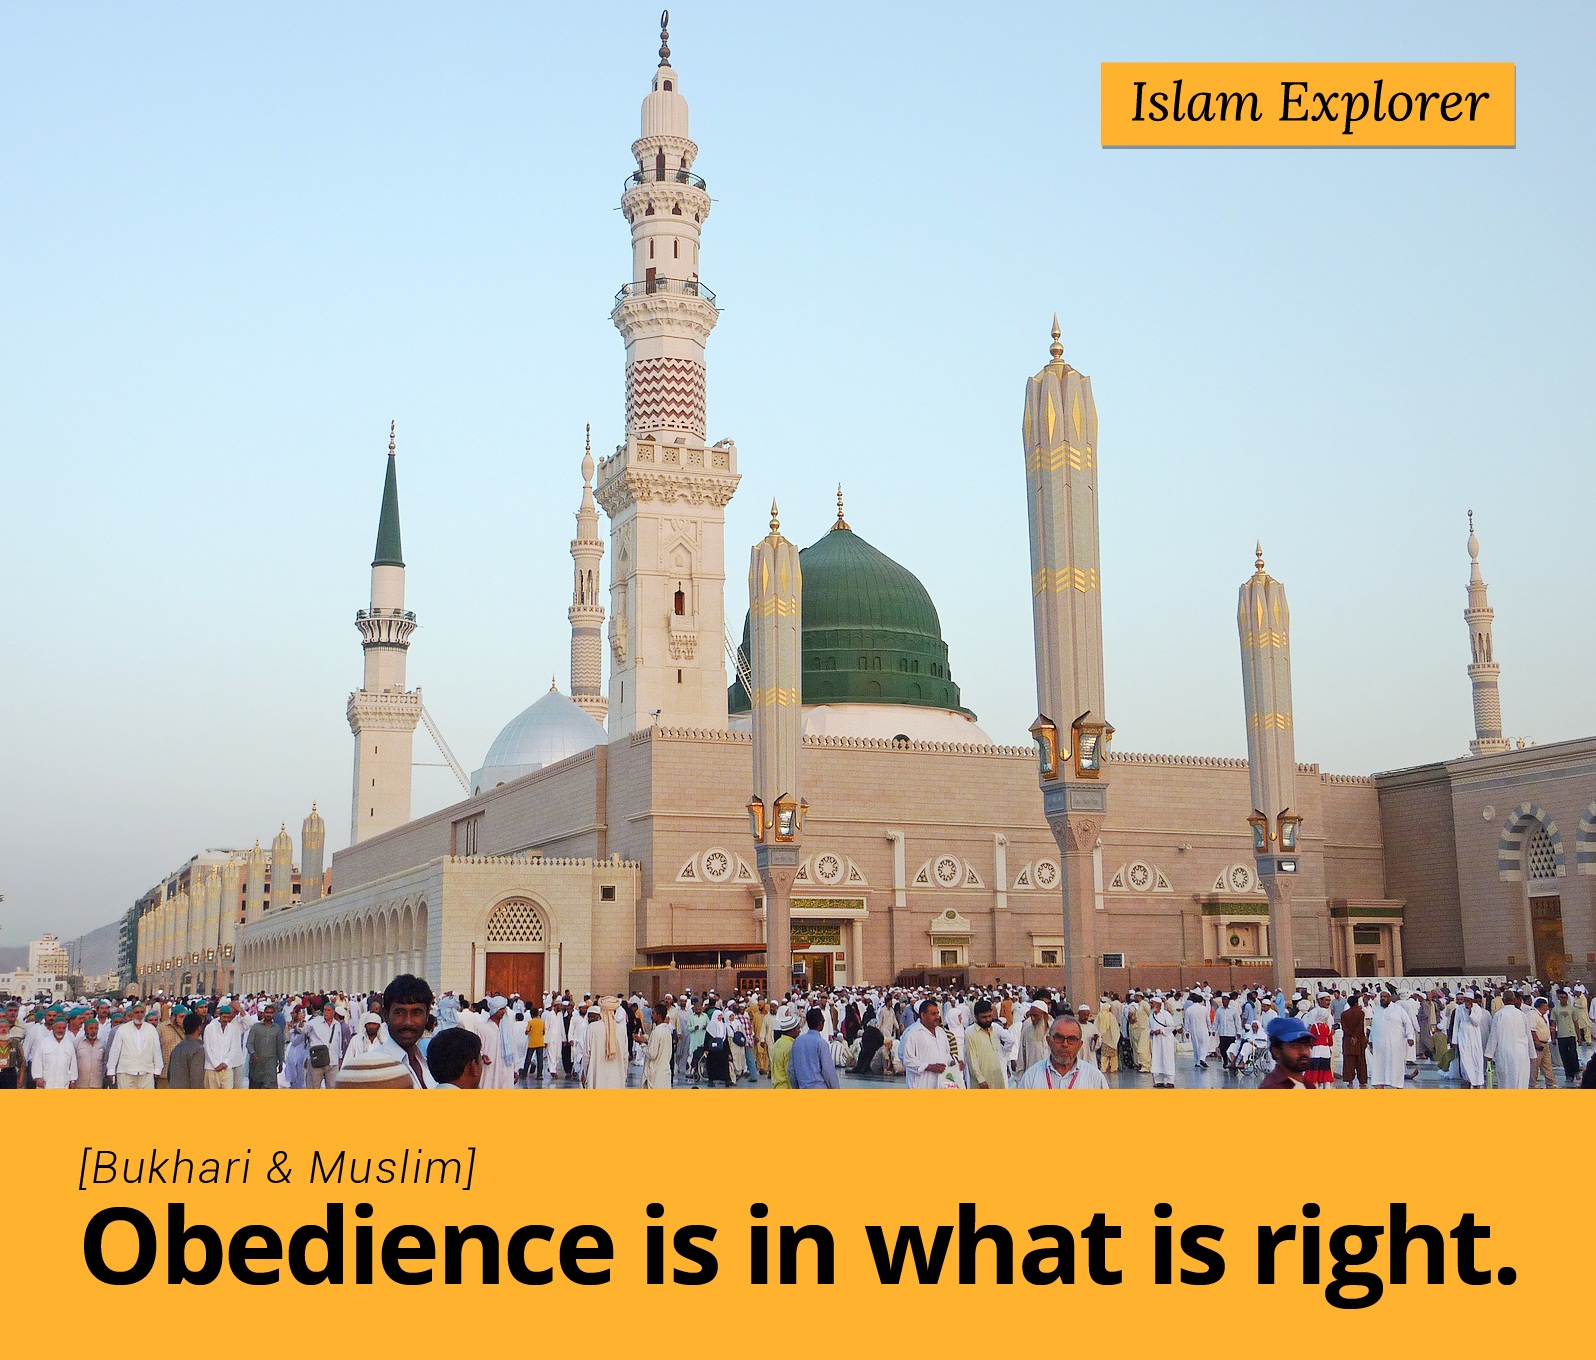 Obedience is in what is right.